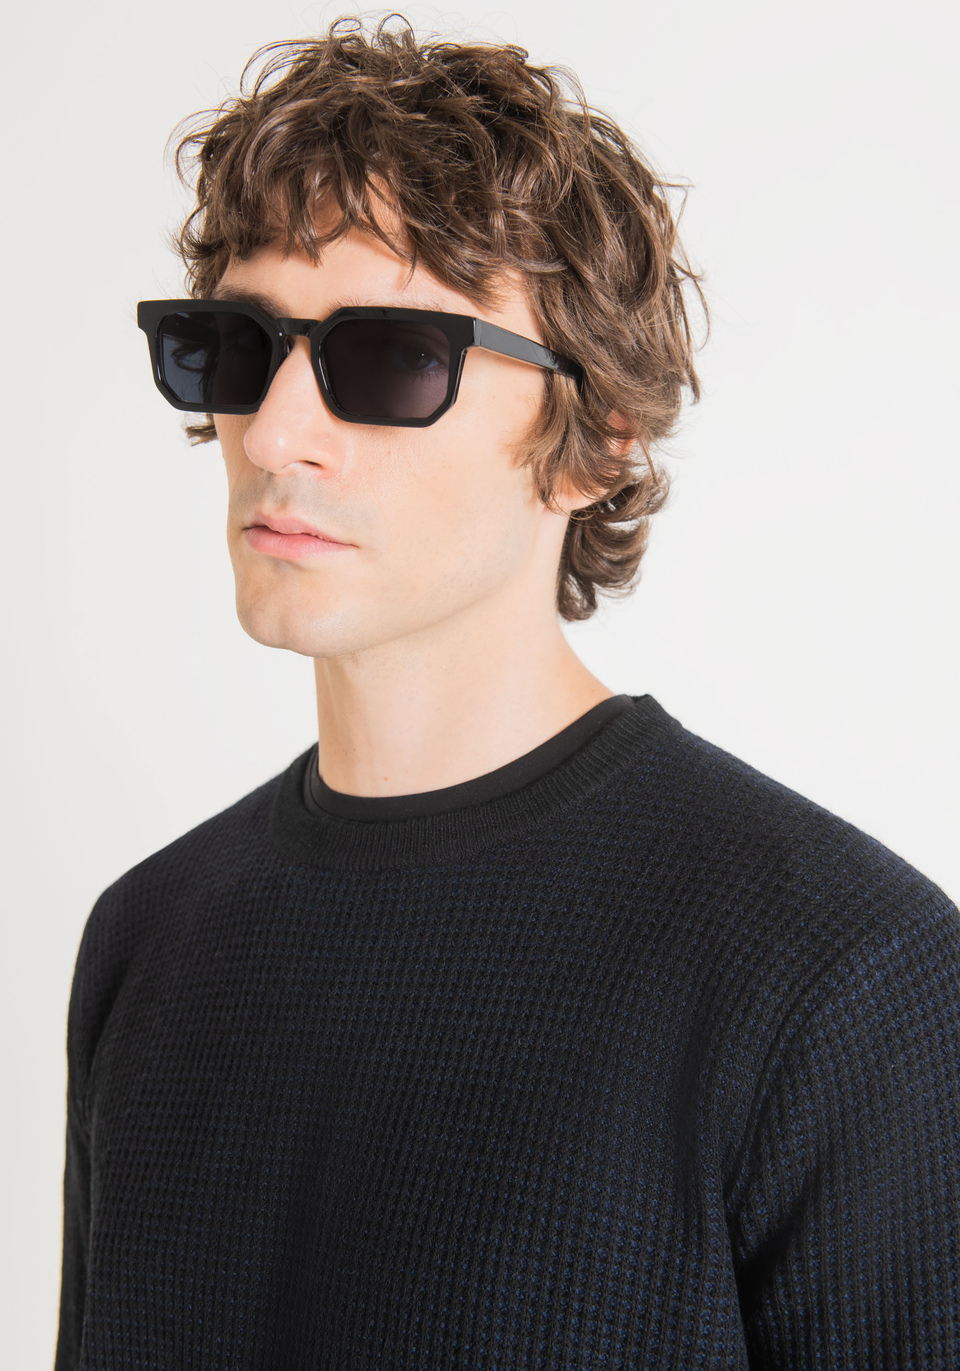 REGULAR-FIT SWEATER IN SOFT MOHAIR WOOL-BLEND YARN WITH ALL-OVER MICRO-PATTERN - Antony Morato Online Shop